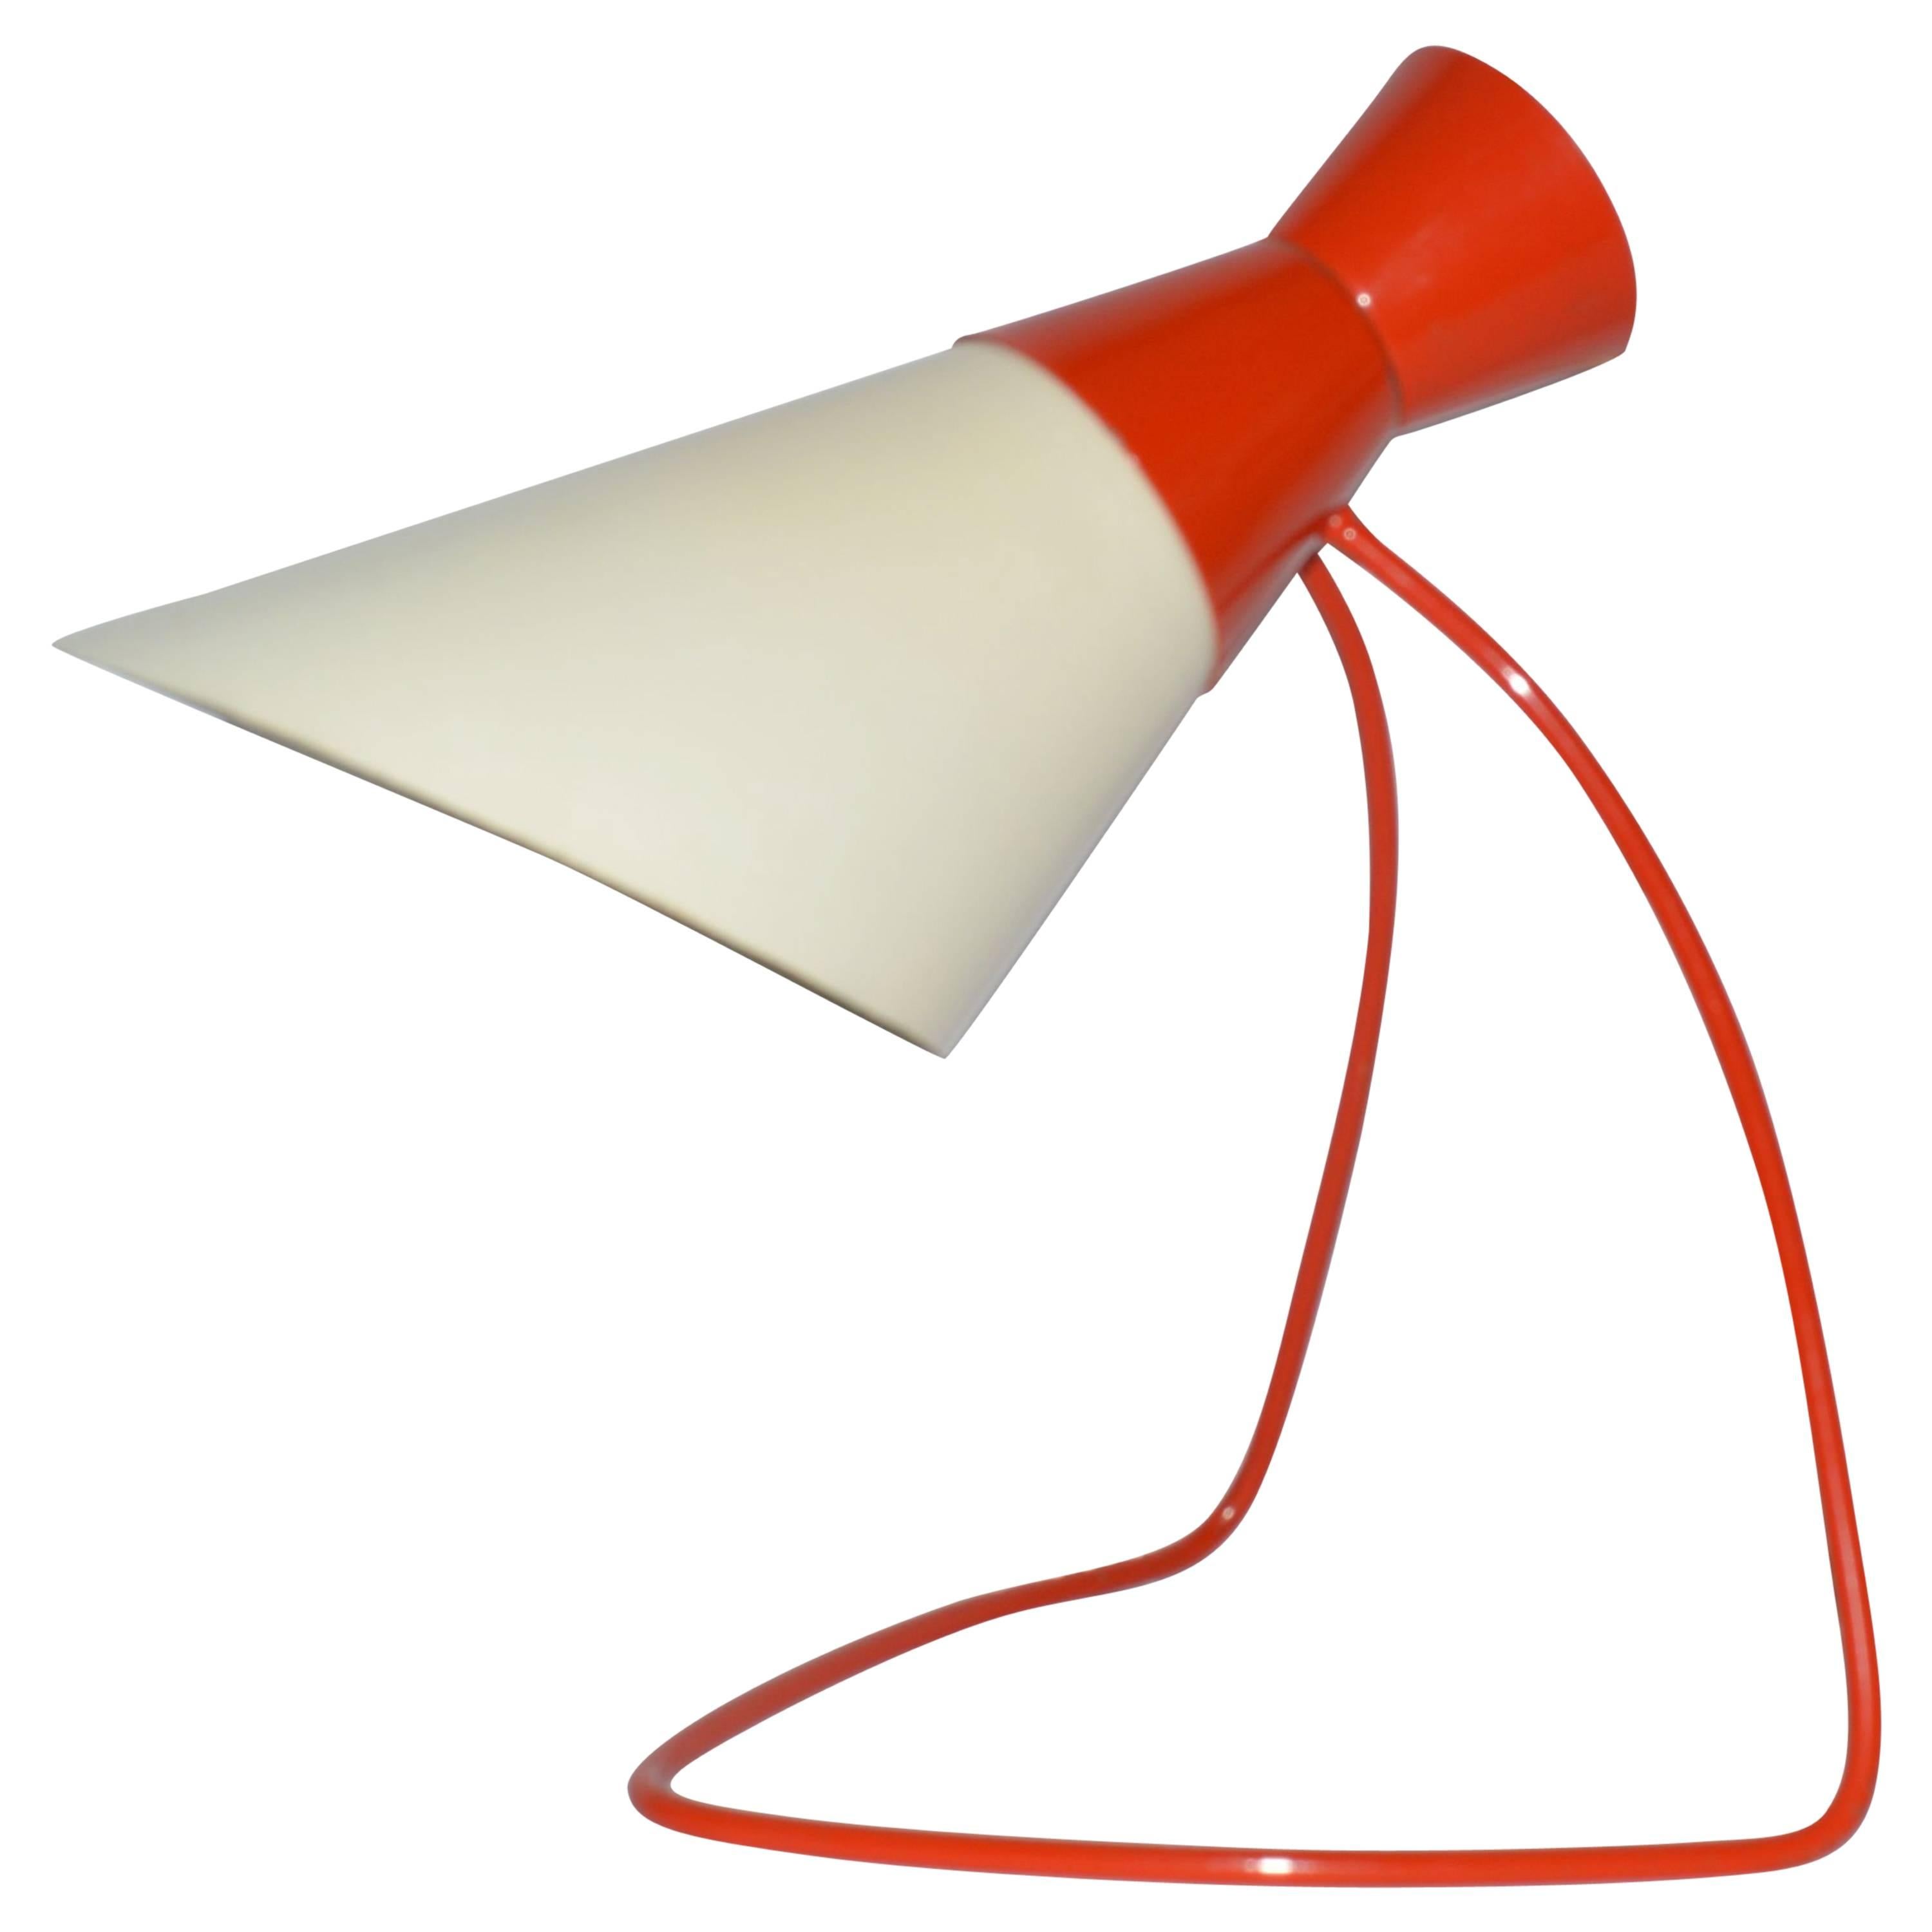 Napako Mid-Century Red and White Table Lamp, Josef Hurka, 1950s